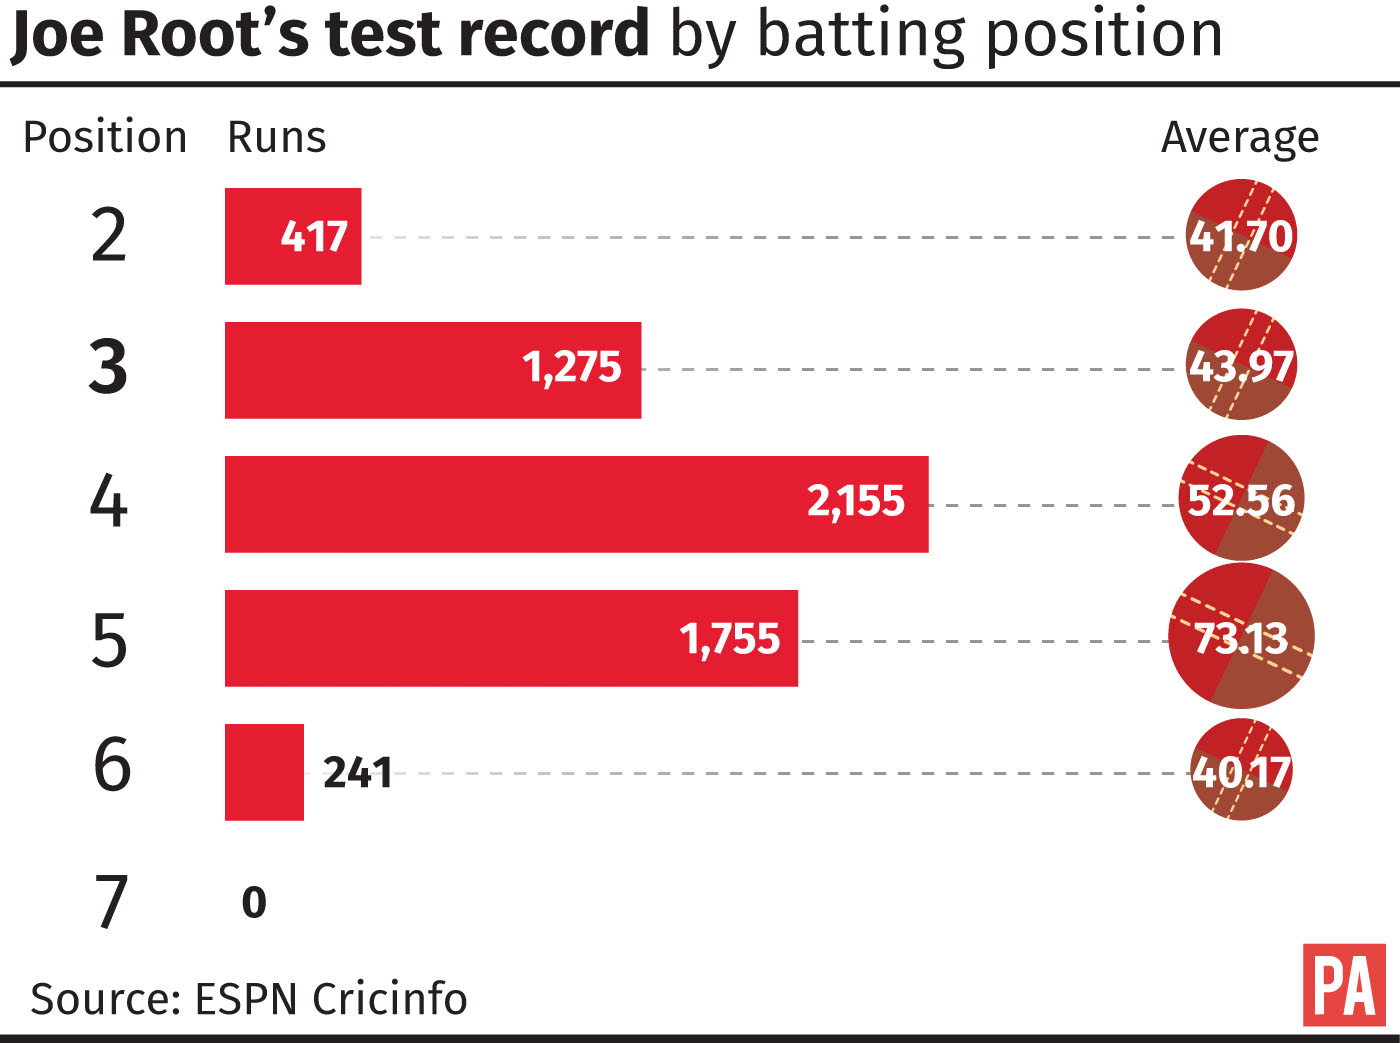 Joe Root's Test record by batting position